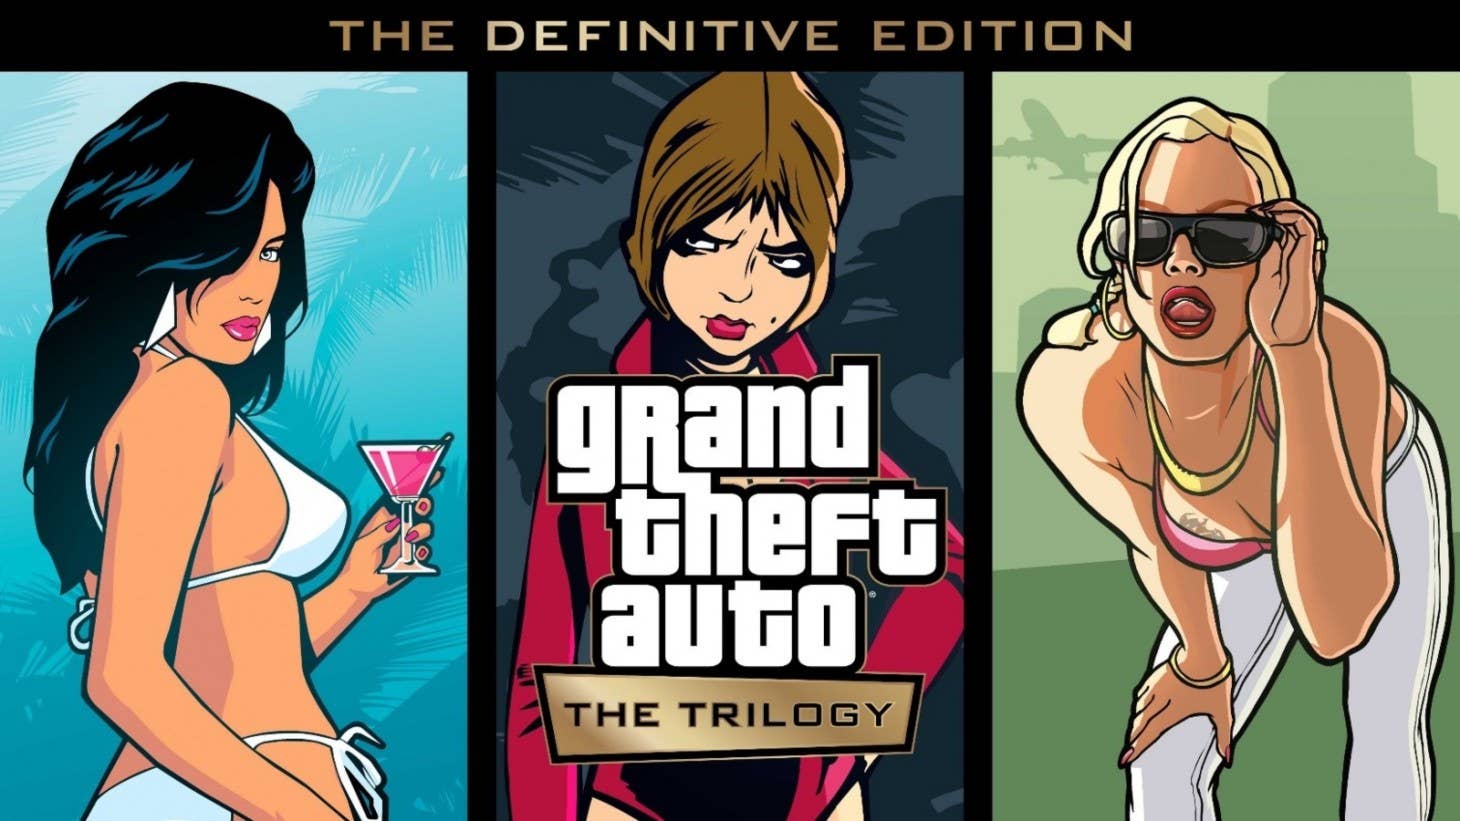 'Grand Theft Auto' remastered trilogy from Rockstar Games, coming to PC and consoles.